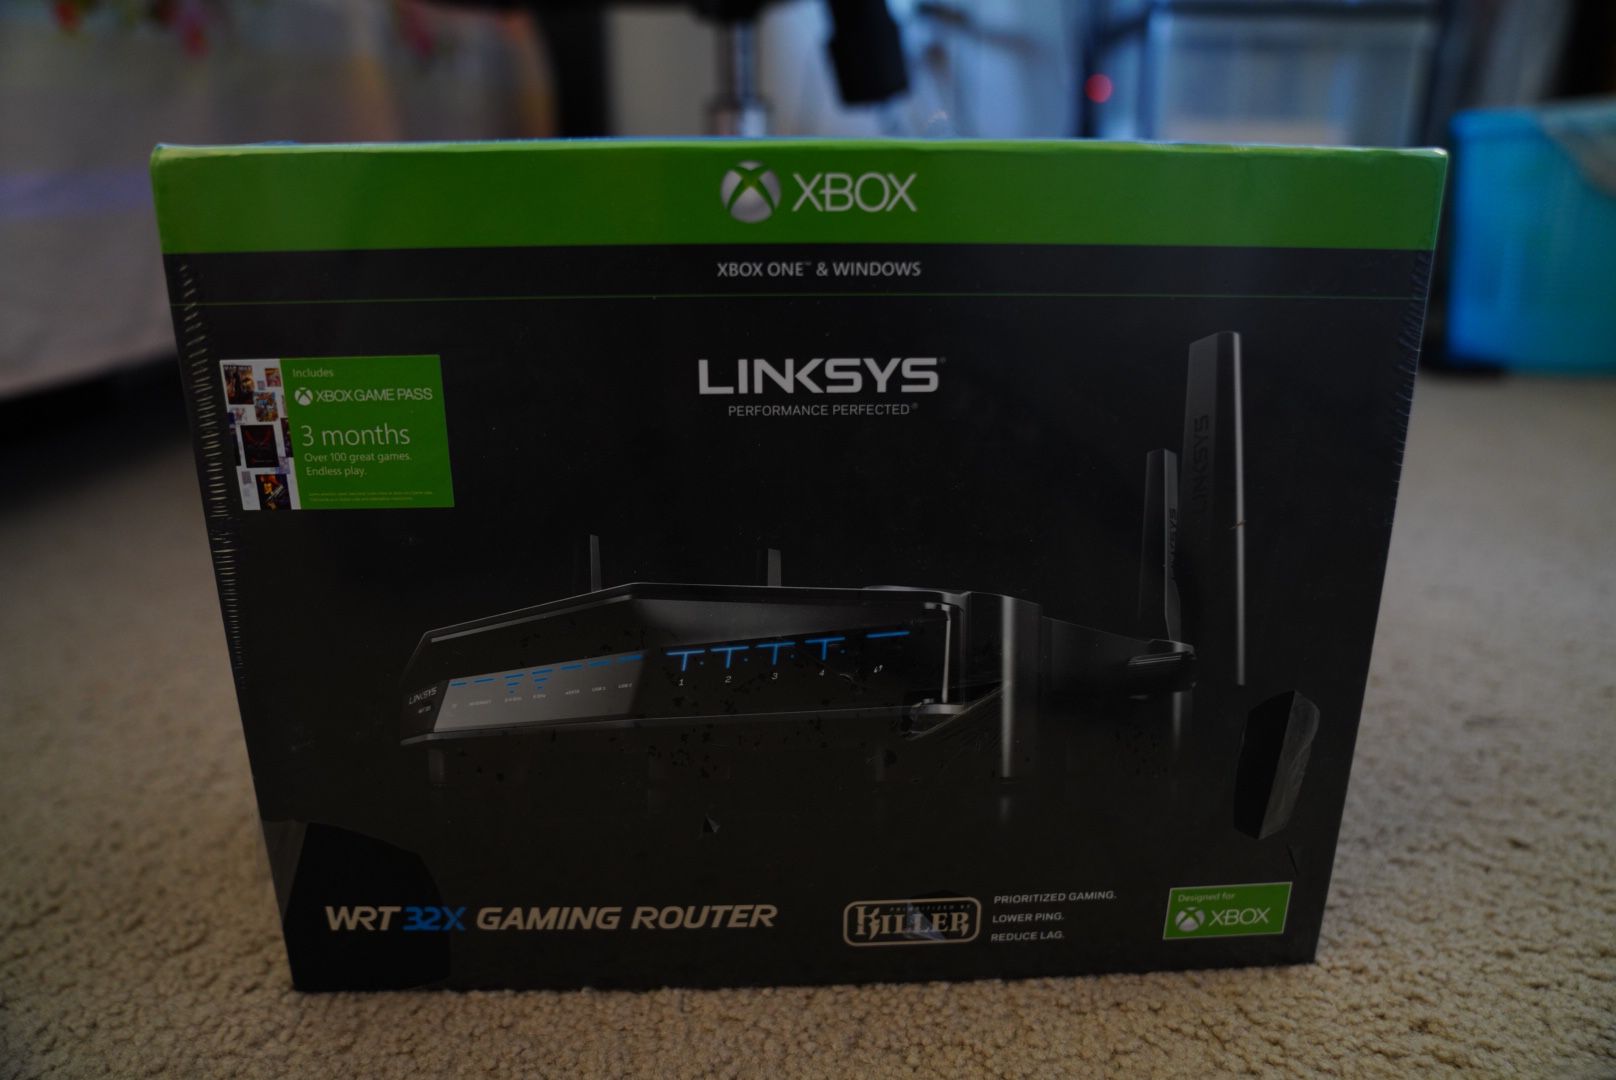 Linksys WRT32X AC3200 Dual-Band WiFi Gaming Router With Killer Prioritization Engine